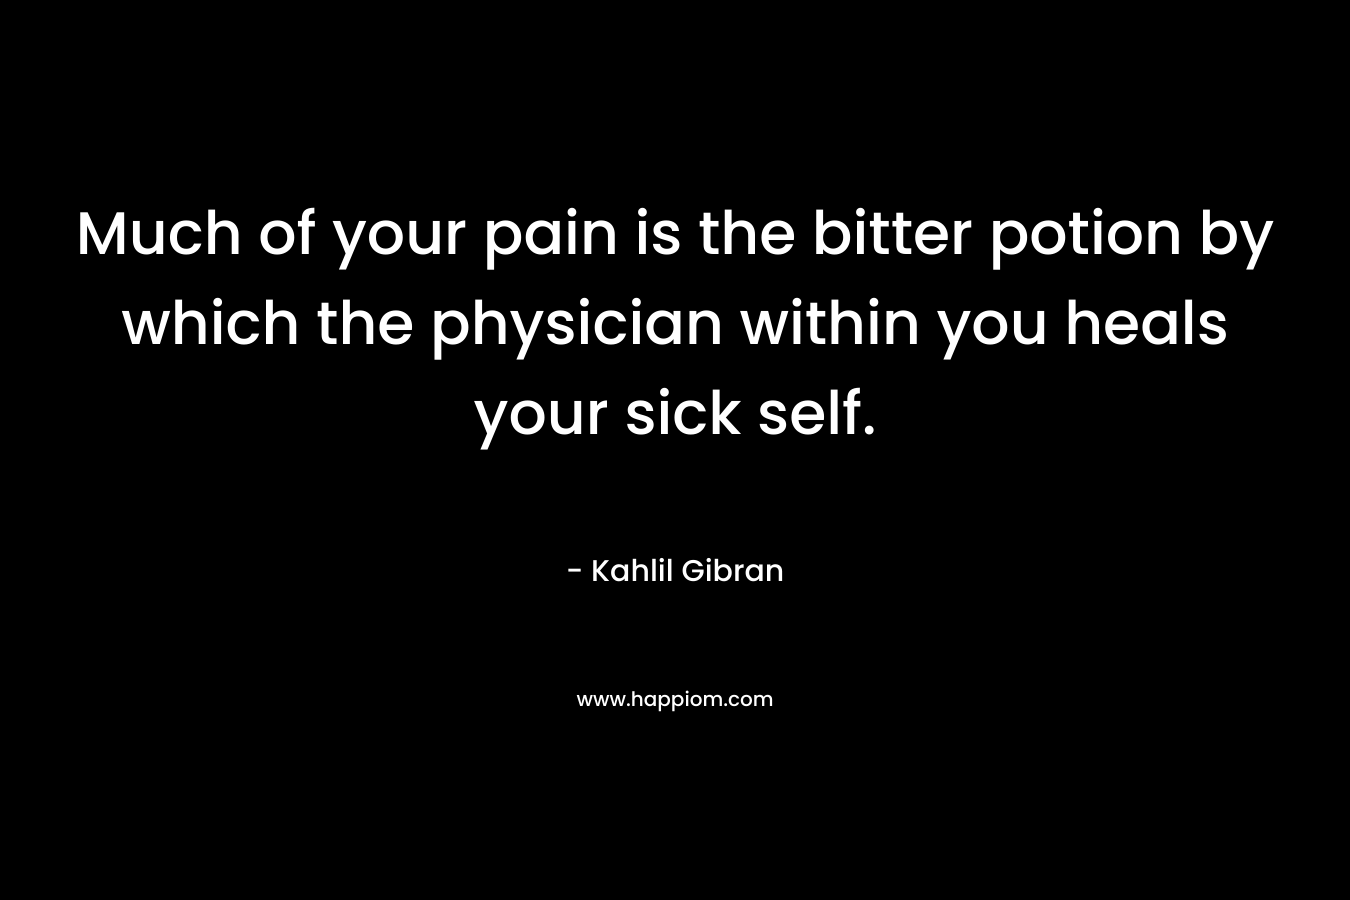 Much of your pain is the bitter potion by which the physician within you heals your sick self. – Kahlil Gibran